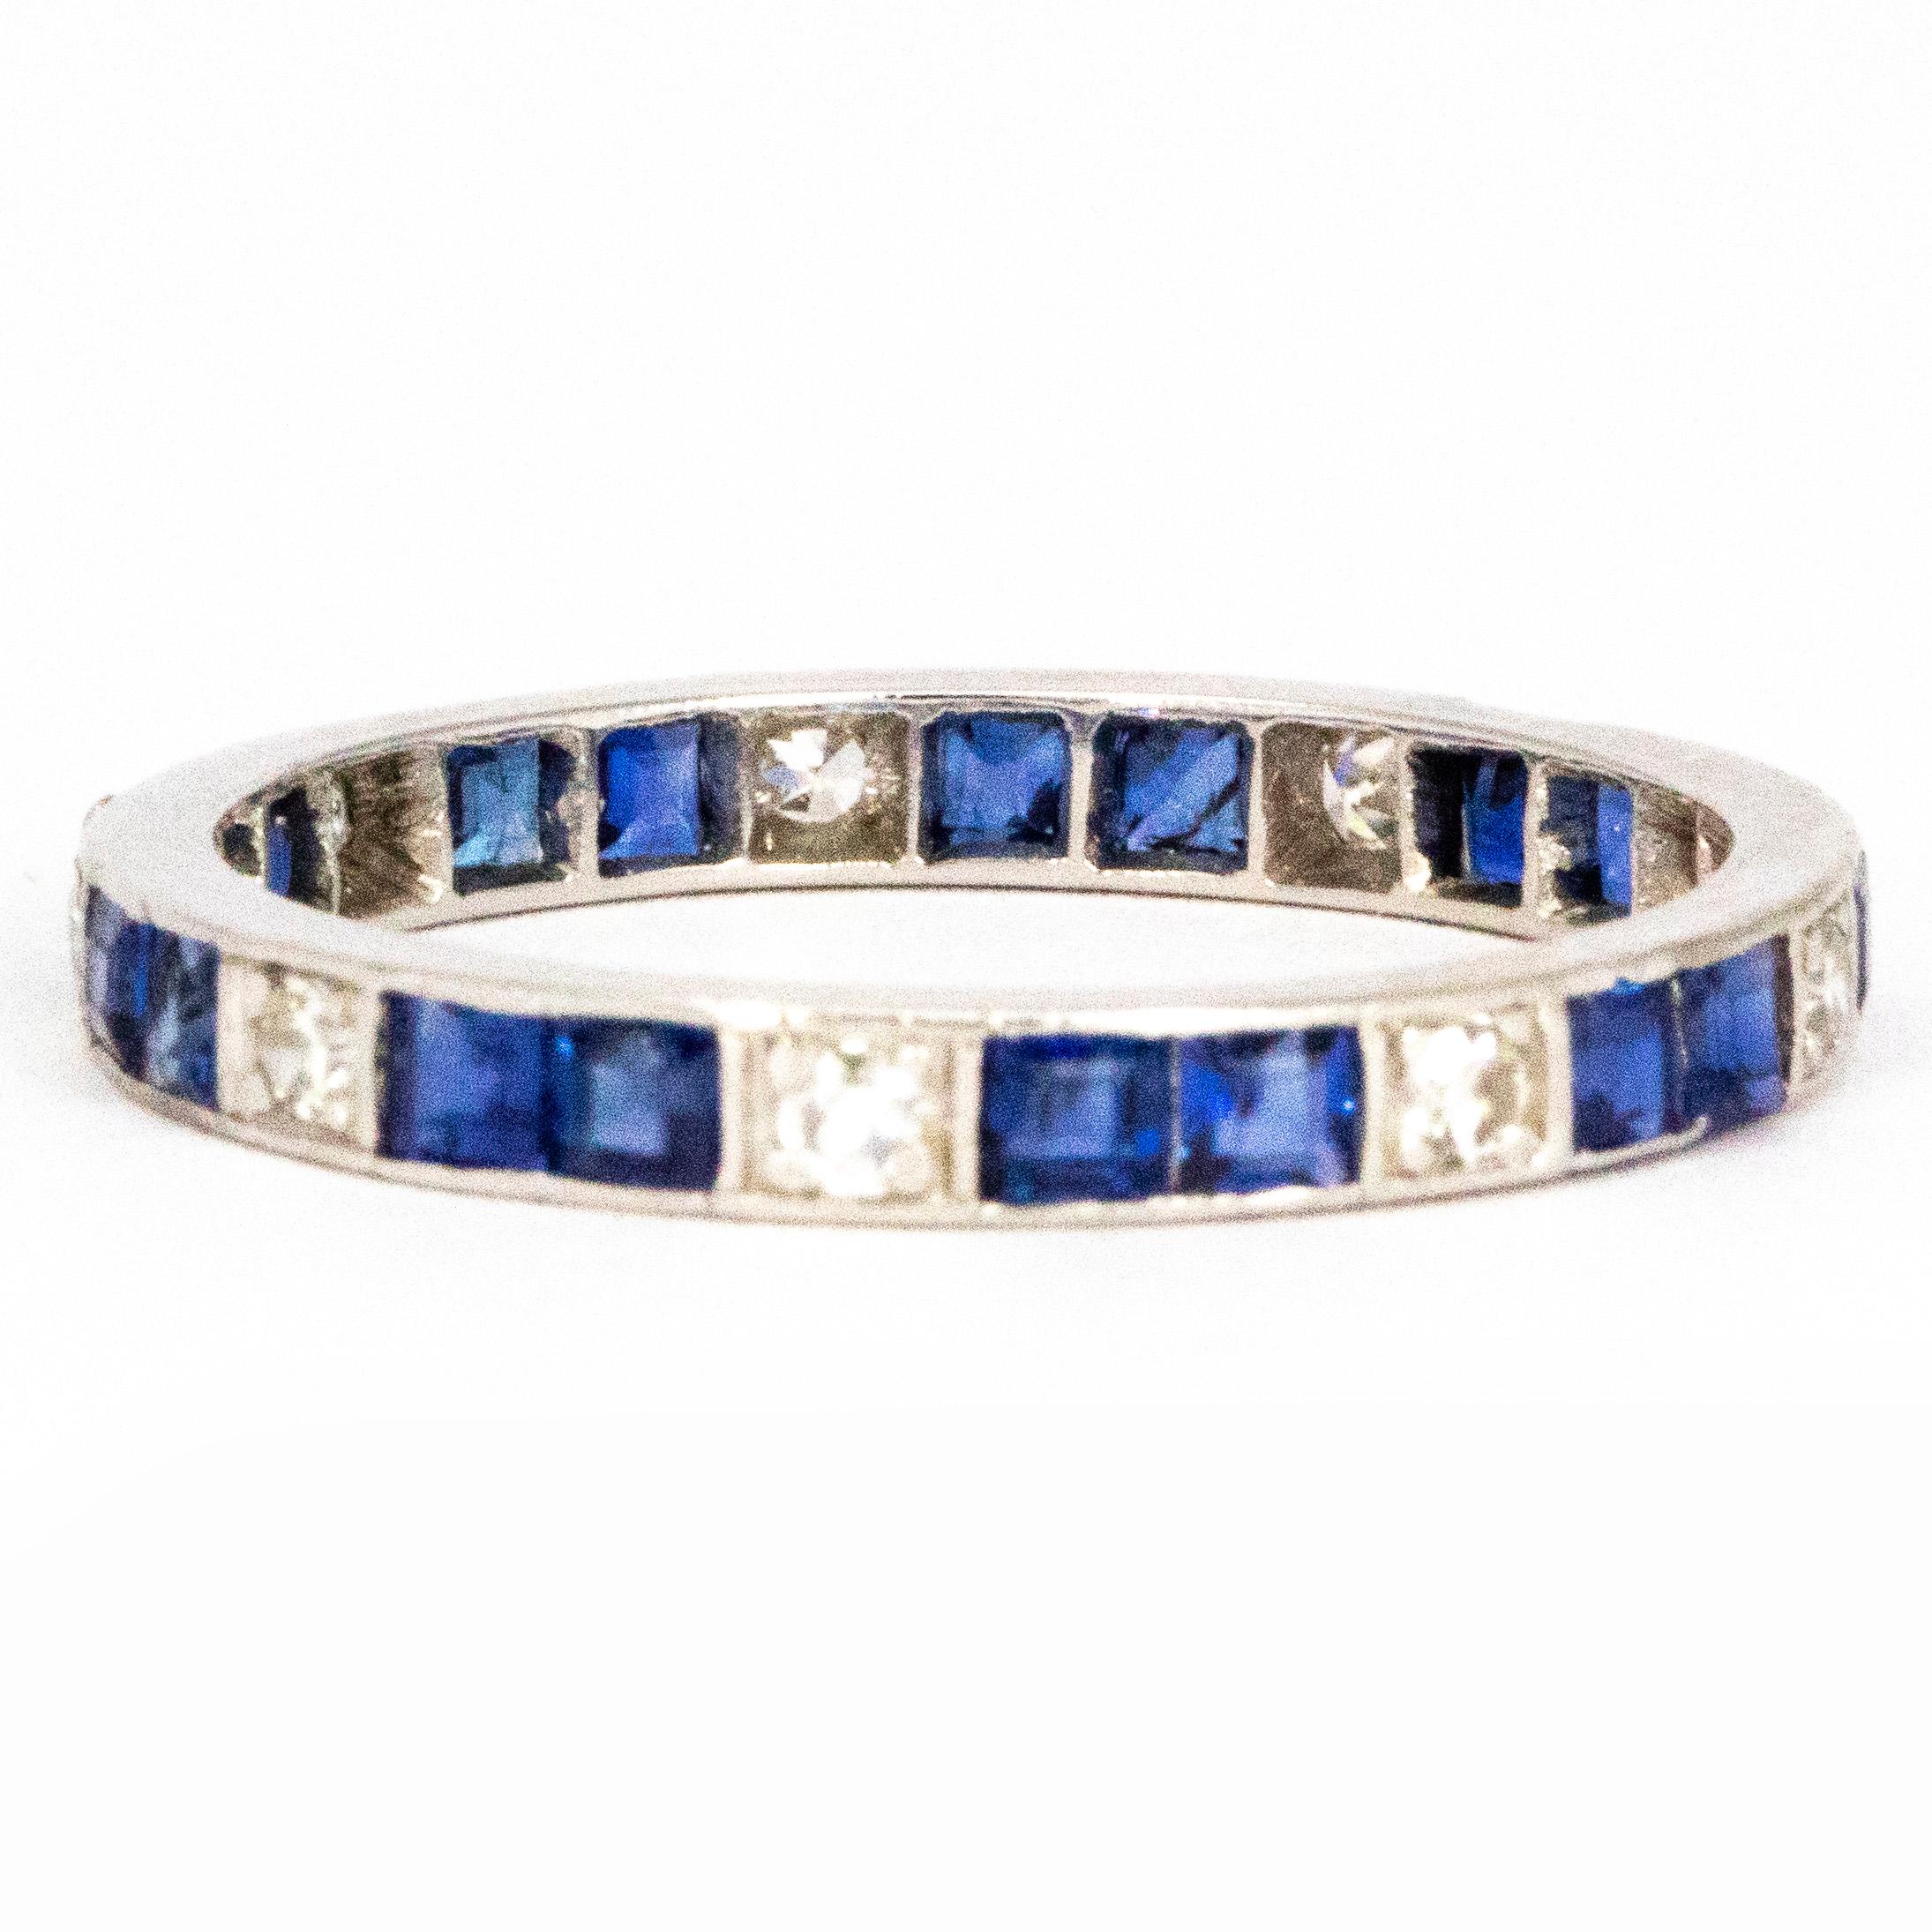 This particular eternity band has the pattern of two sapphires to one diamond which adds a great pop of colour to the band. The sapphires measure 10pts each and the diamonds measure 4pts. 

Ring Size: R or 8 1/2
Band Width: 2.5mm